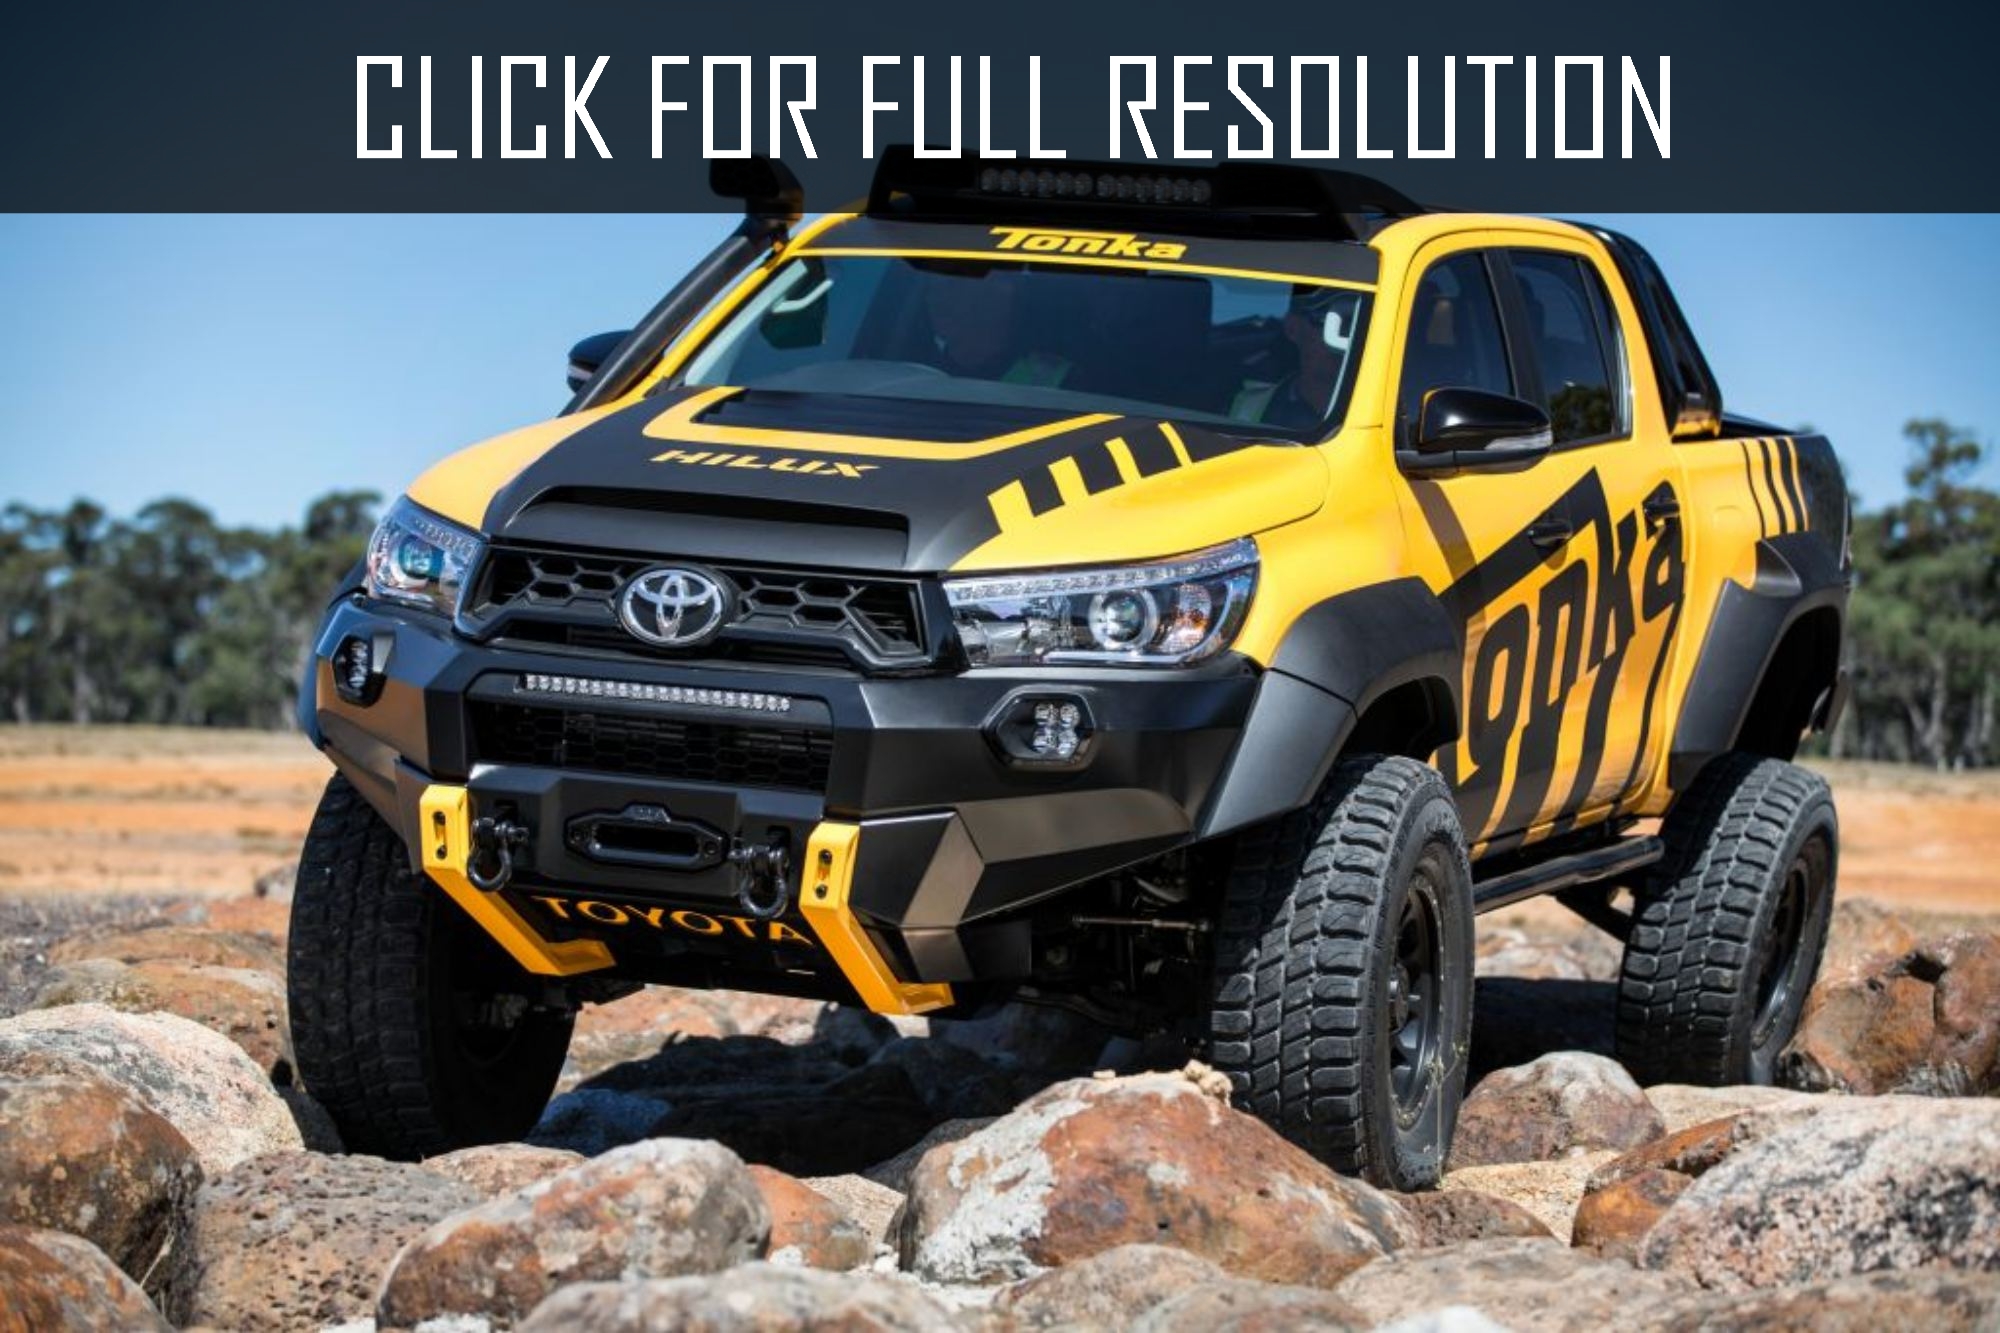 Toyota Hilux Modified amazing photo gallery, some information and